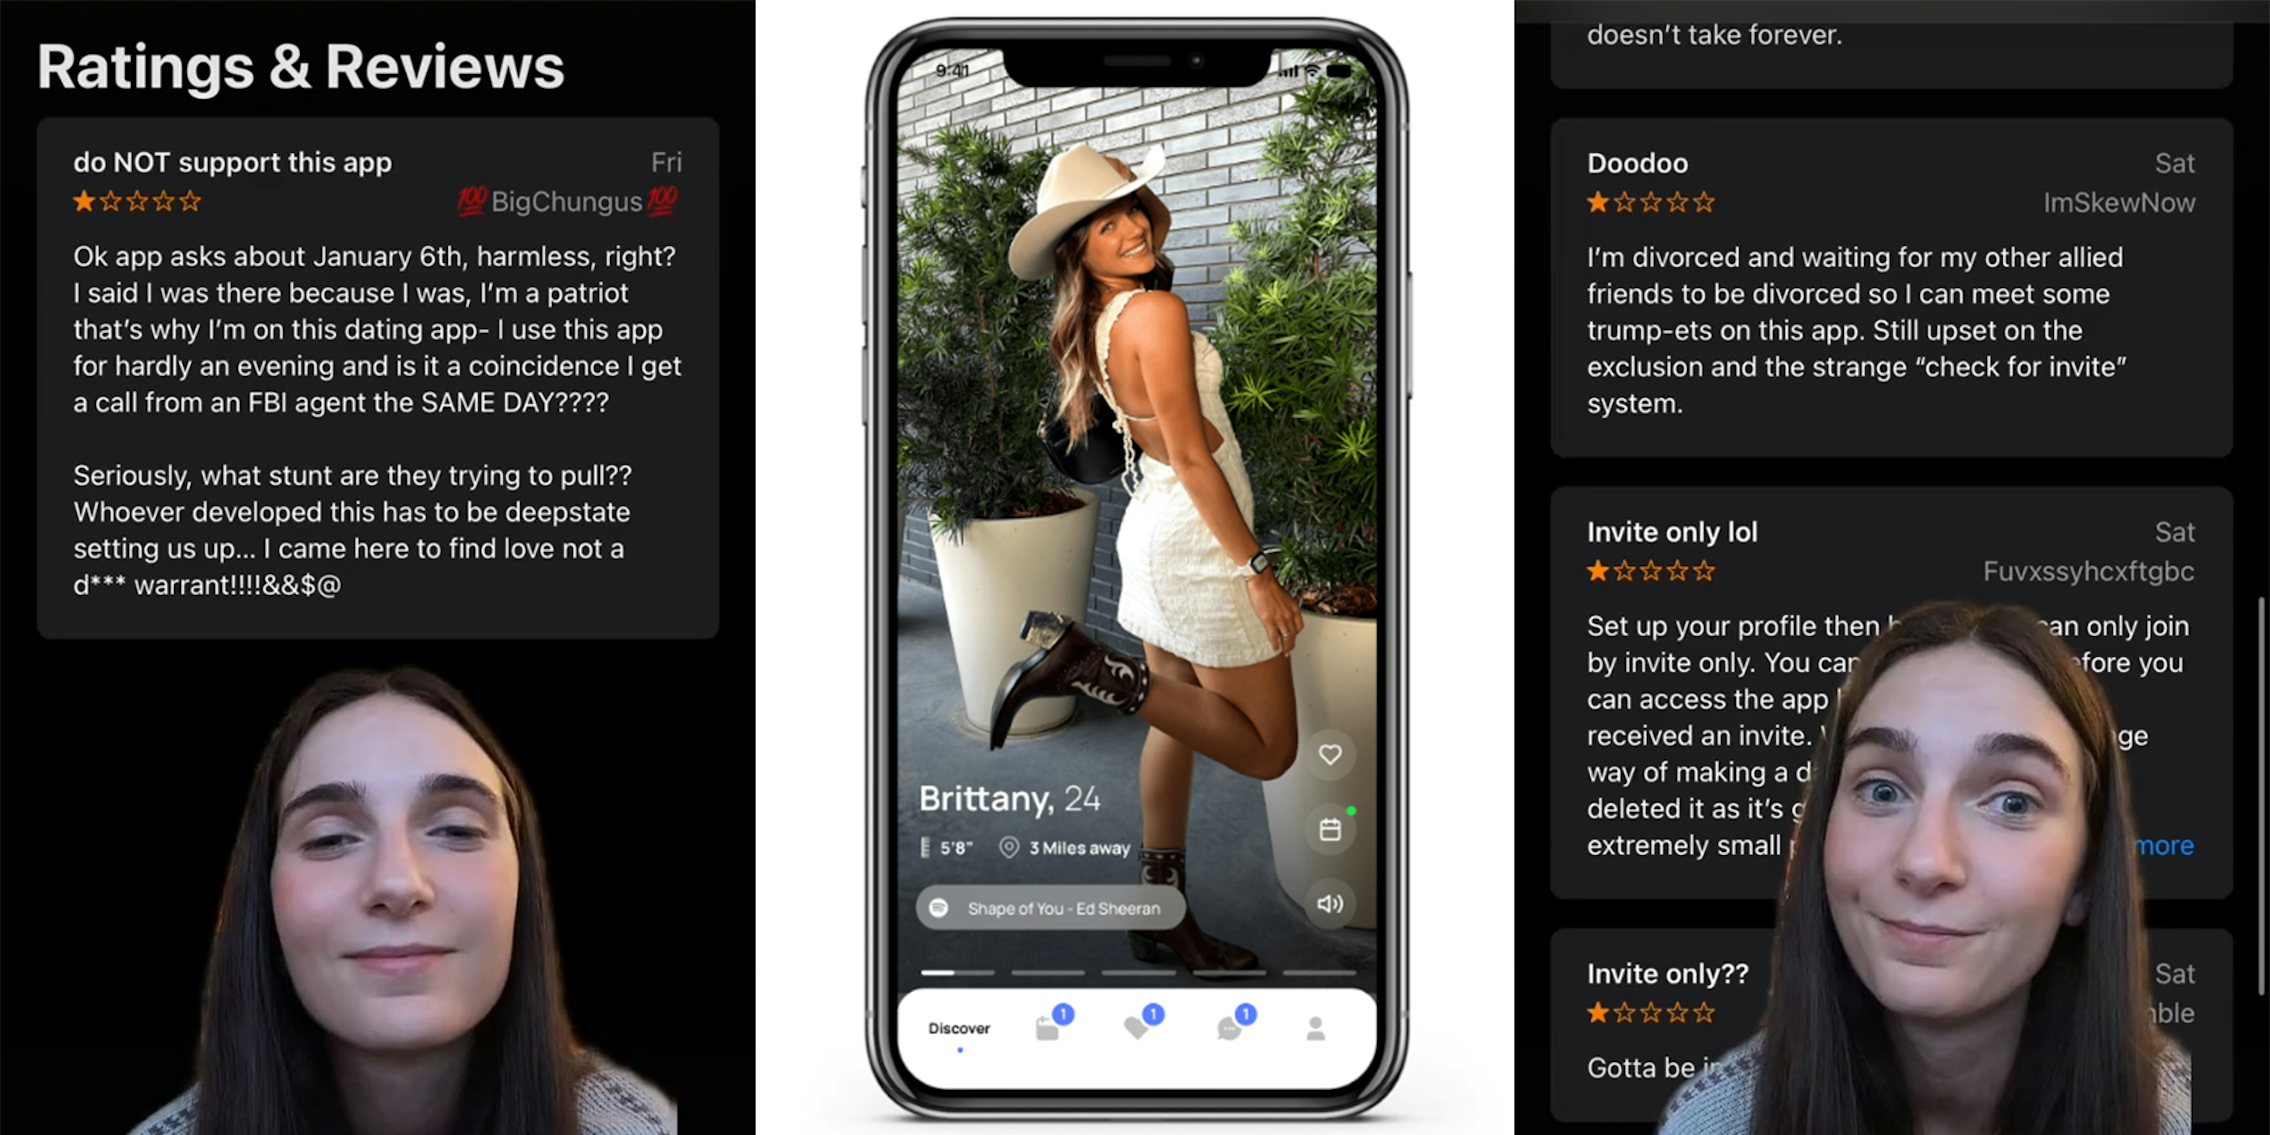 woman with 'ratings & reviews' of The Right Stuff dating app (l&r) The Right Stuff dating app with woman in cowboy hat and boots (c)